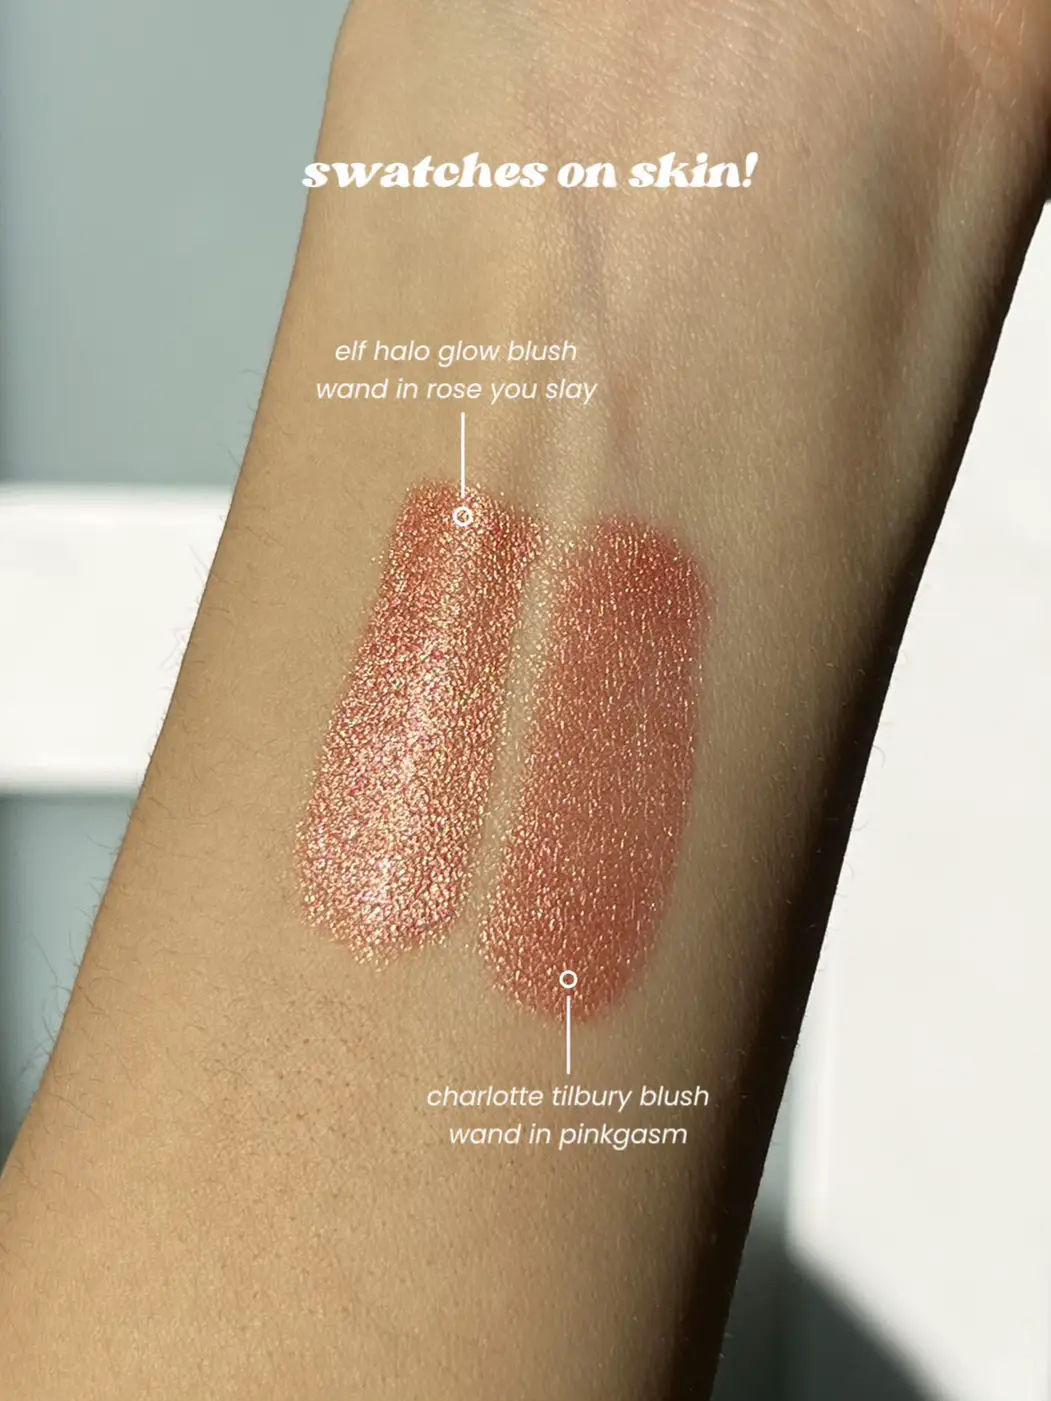 E.L.F. Halo Glow Beauty Wand review: Do they dupe Charlotte Tilbury?